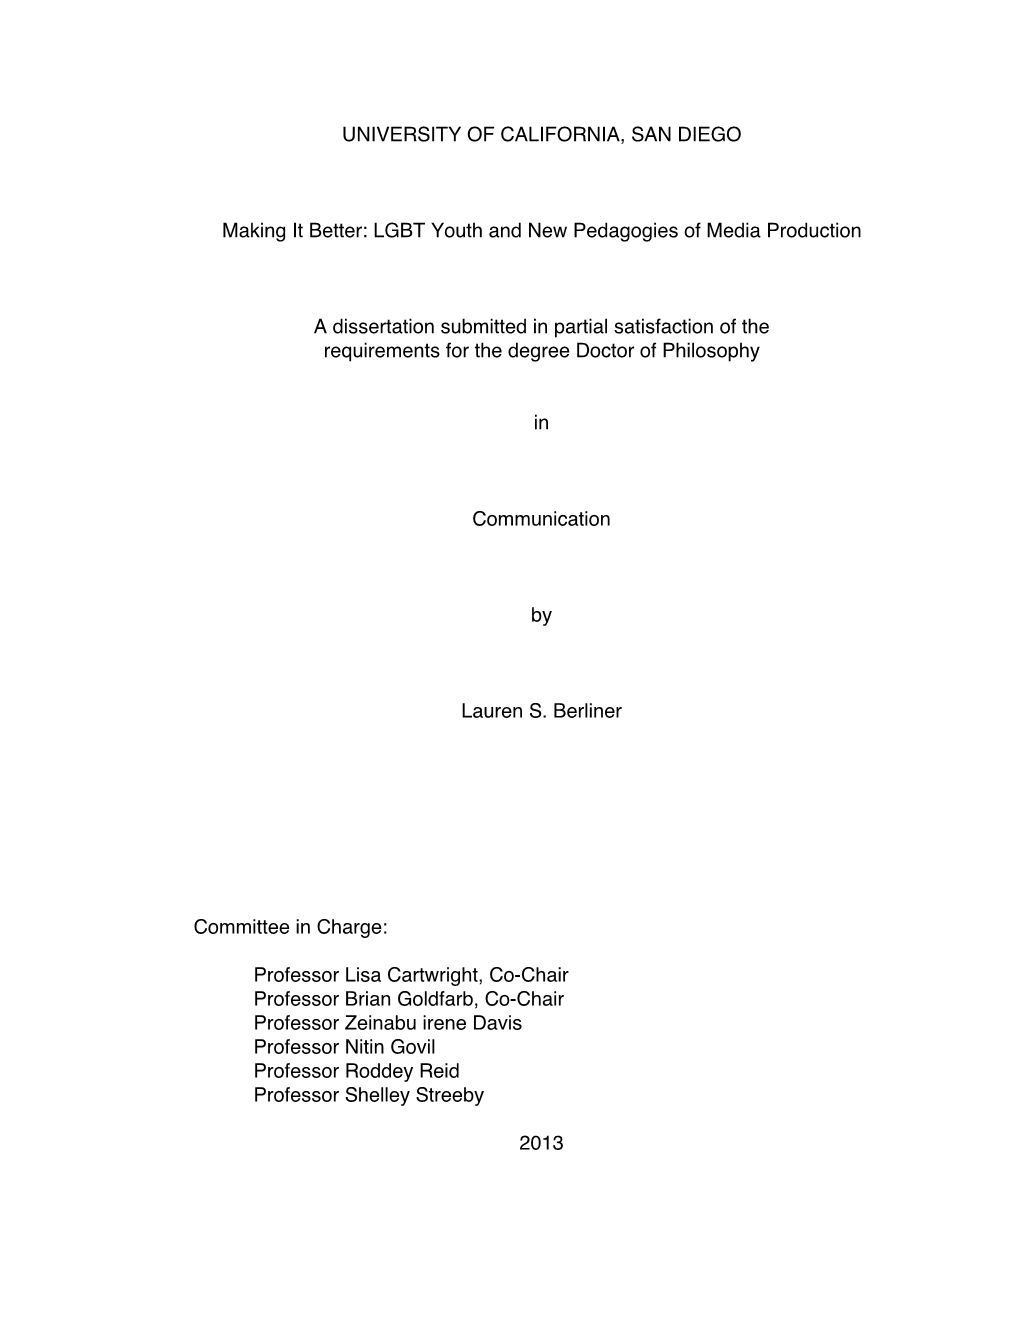 LGBT Youth and New Pedagogies of Media Production A